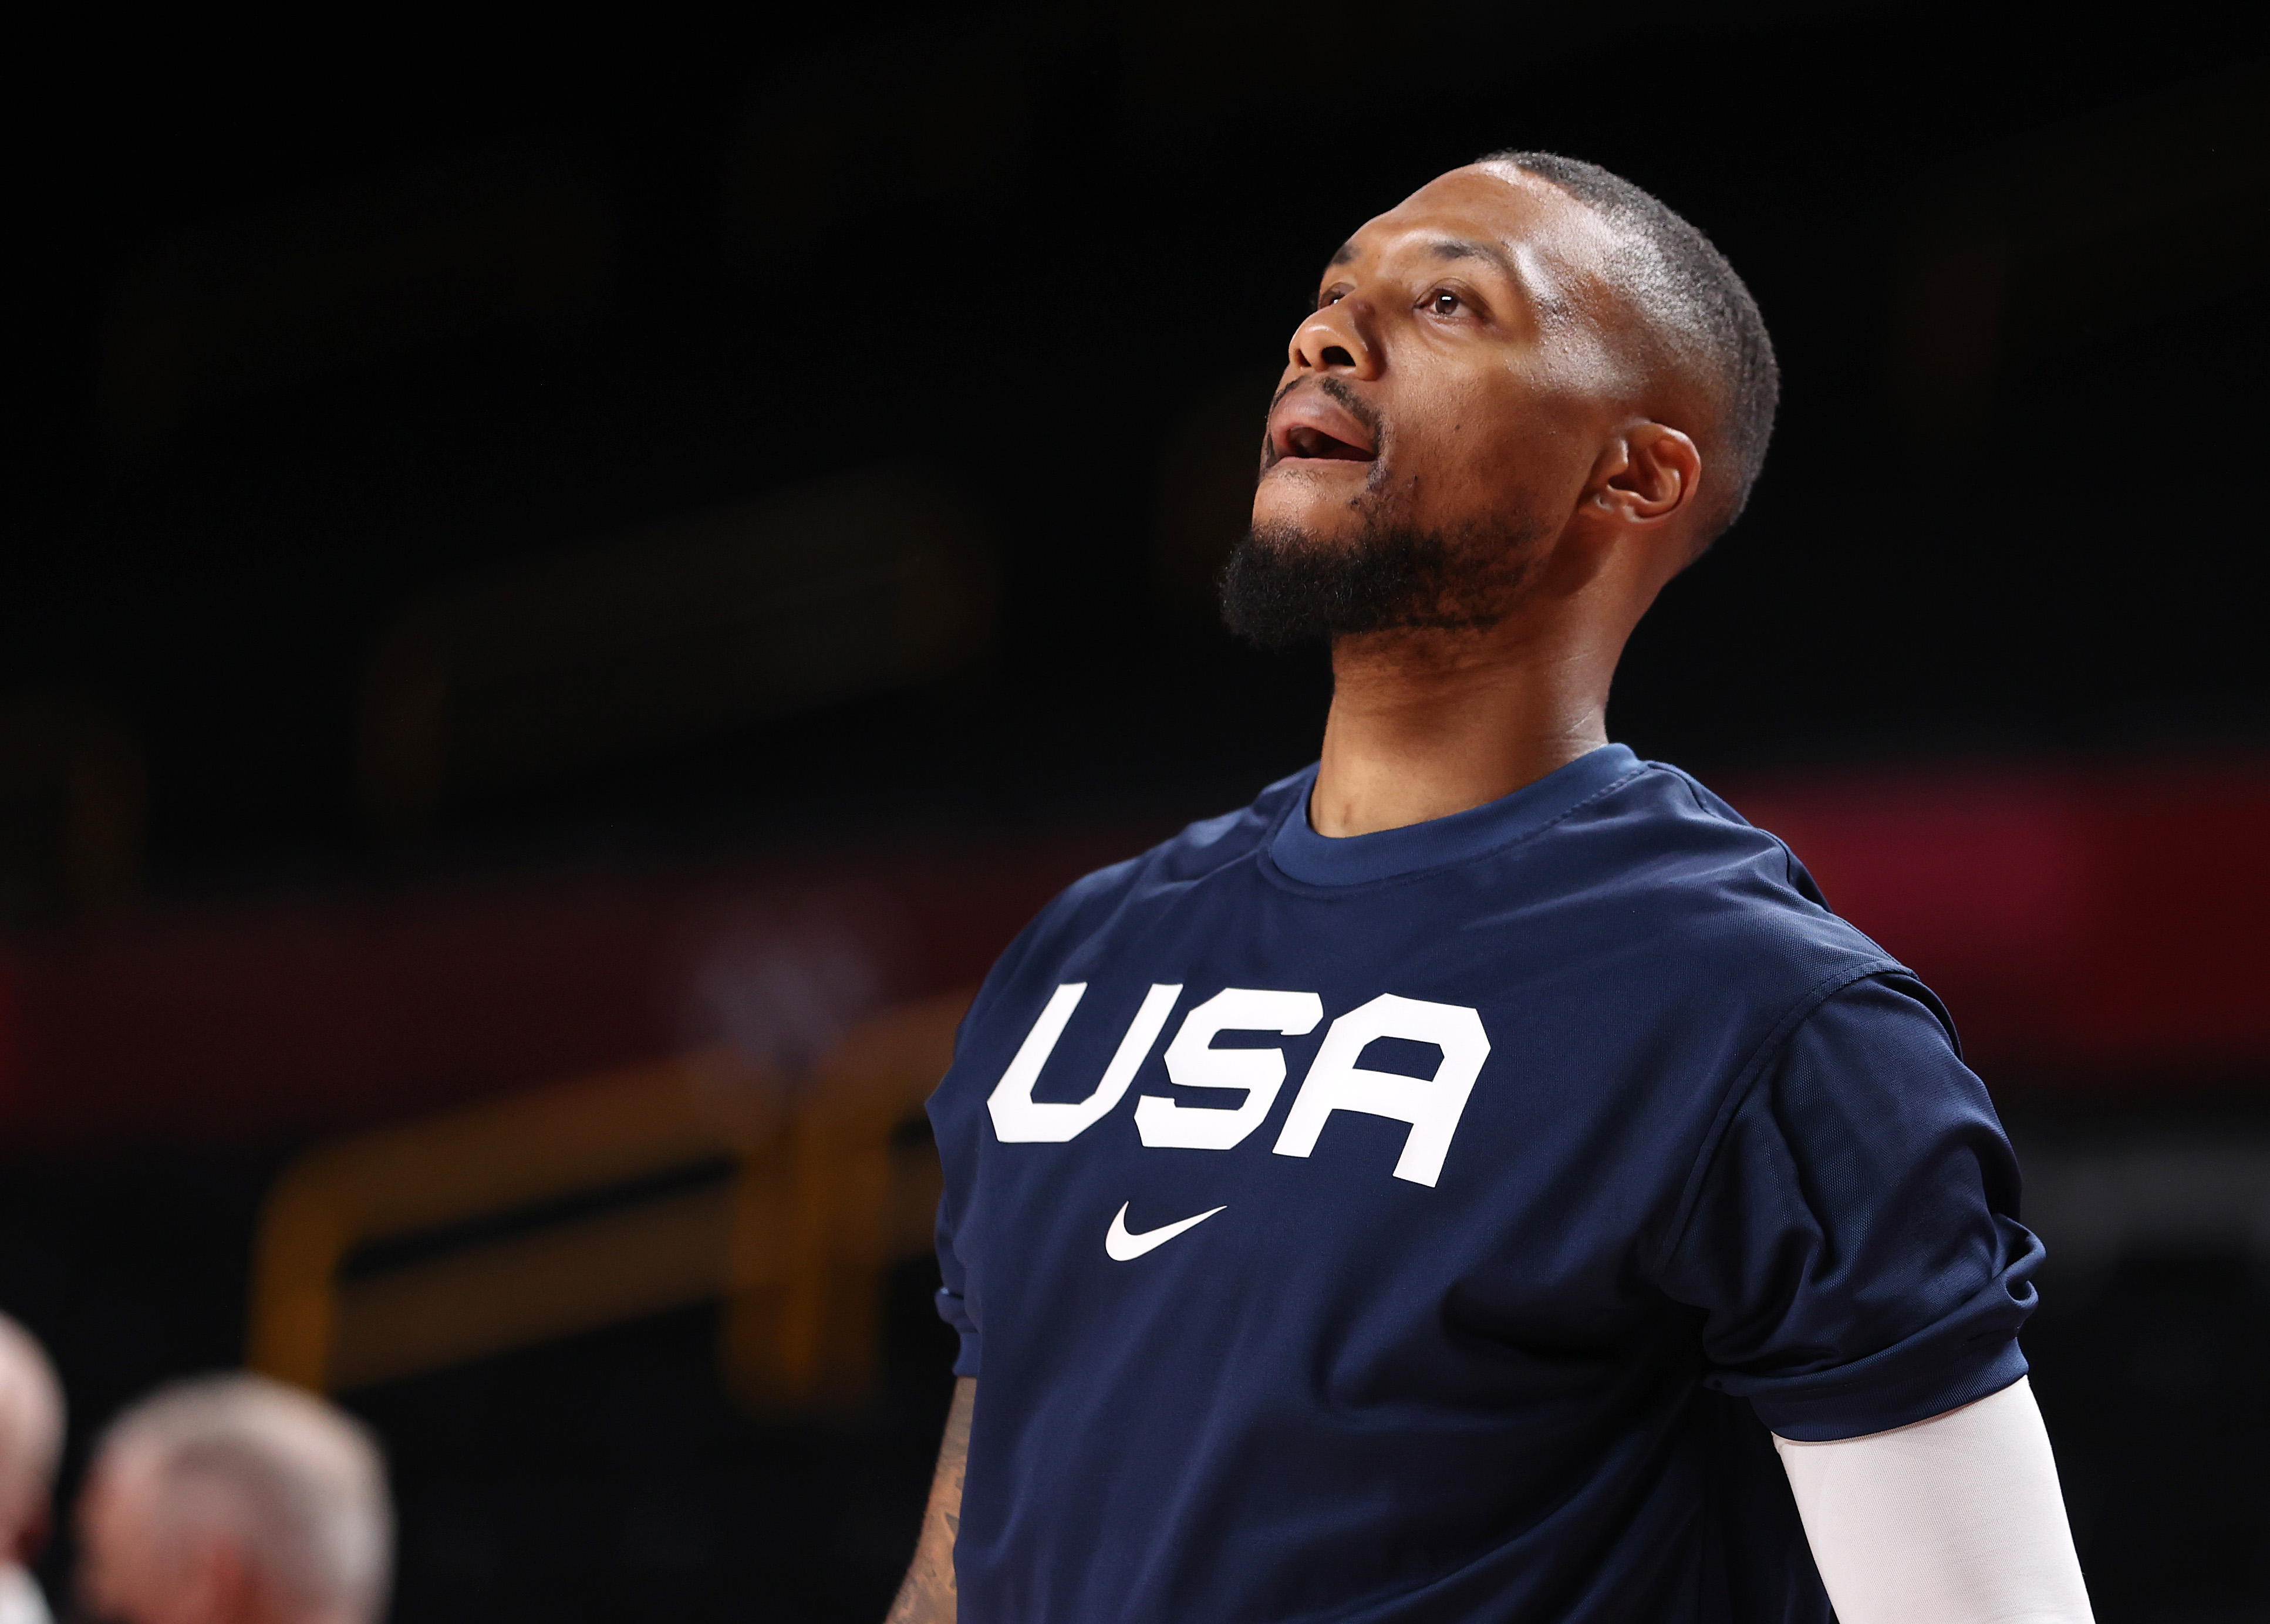 Damian Lillard warms up for Team USA's game against Iran